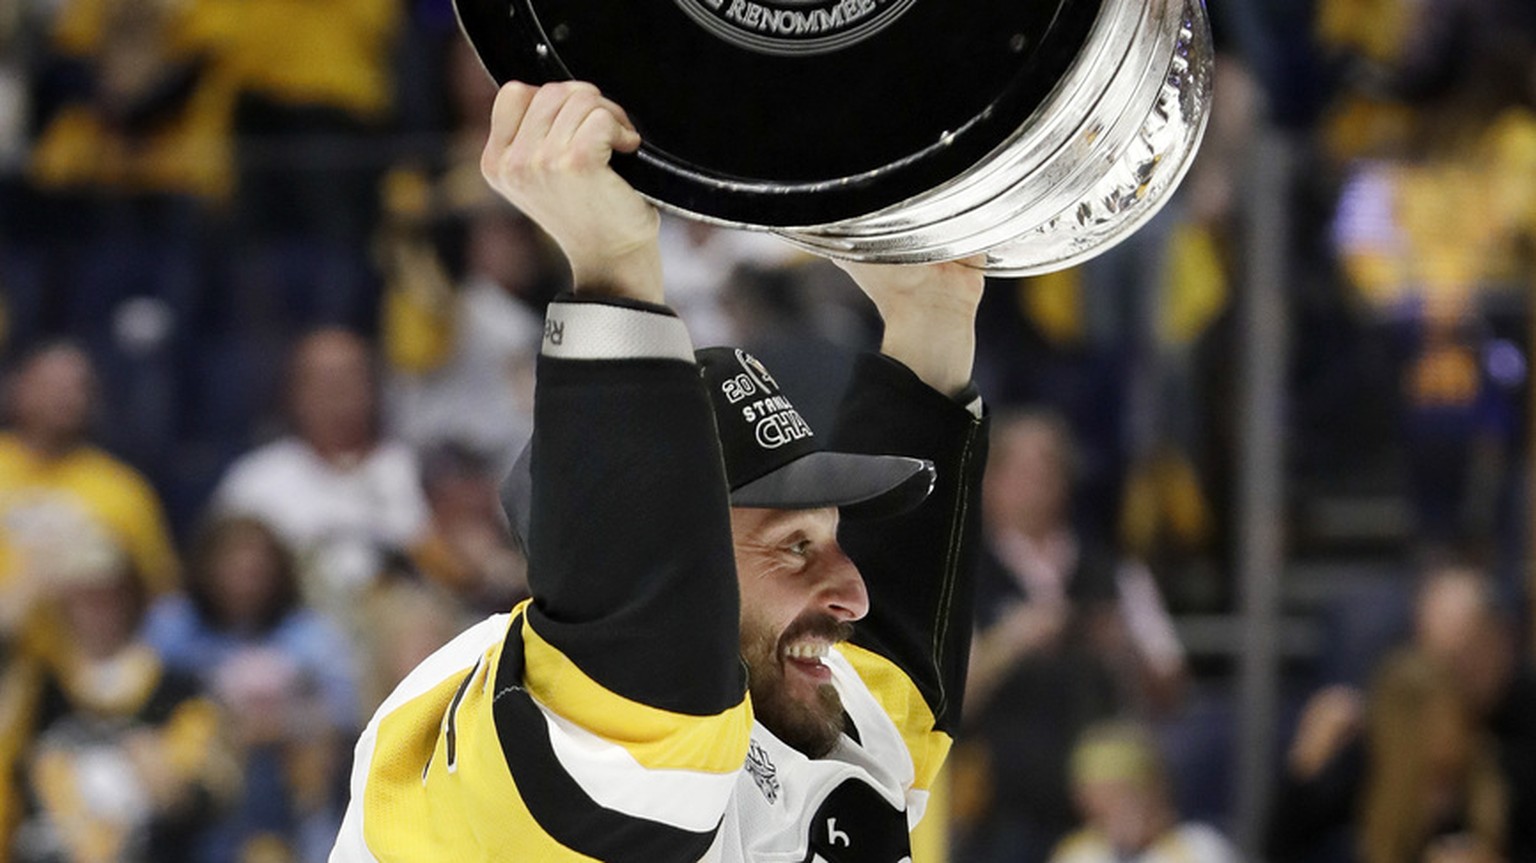 Pittsburgh Penguins defenseman Mark Streit, of Switzerland, celebrates with the Stanley Cup after the Penguins defeated the Nashville Predators 2-0 in Game 6 of the NHL hockey Stanley Cup Finals Sunda ...